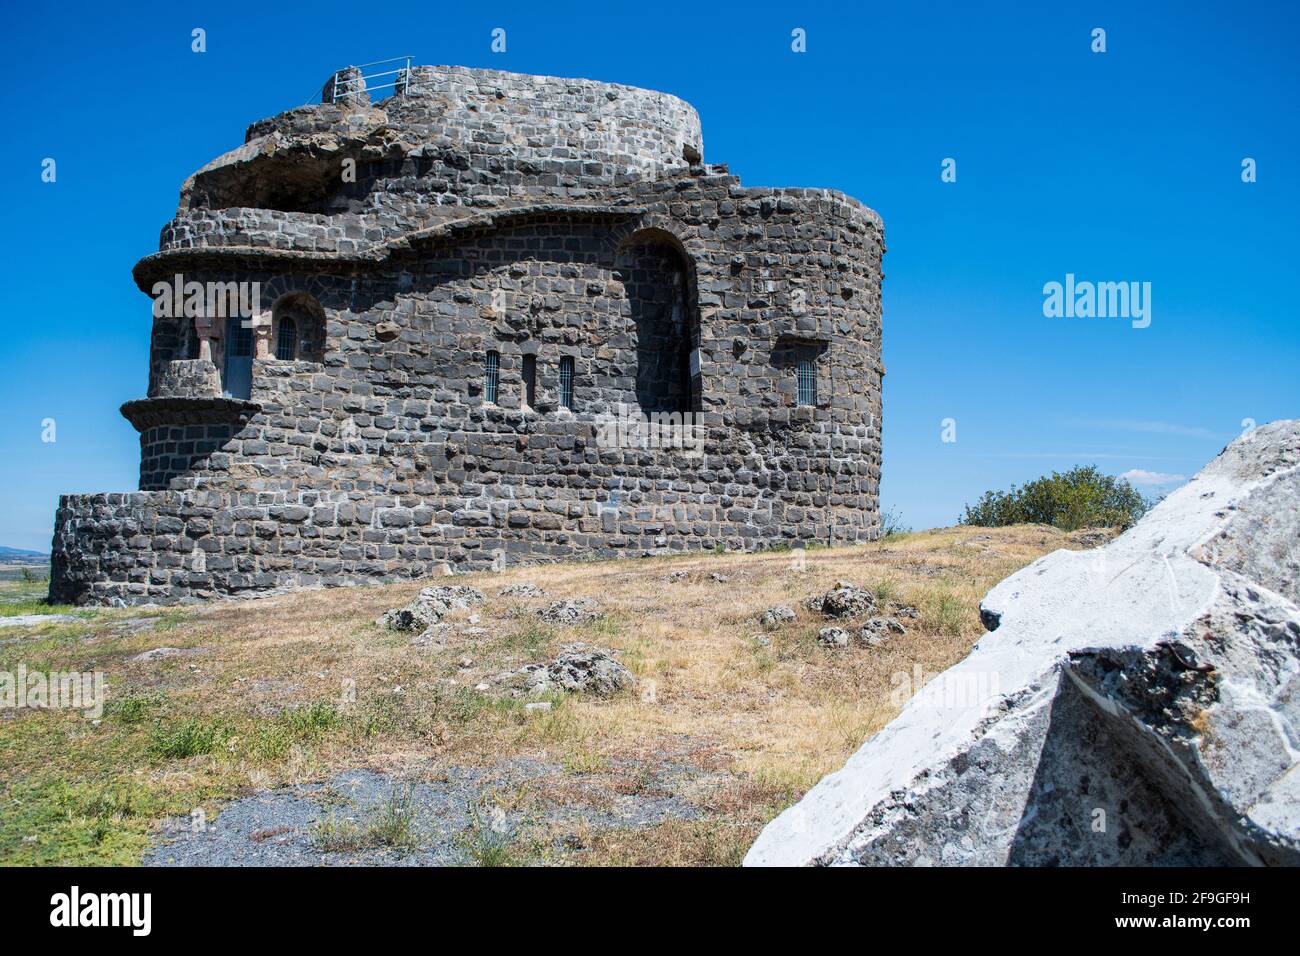 Zebrnjak monument is was built in 1937, for the 25th anniversary of the Battle of Kumanovo which took place on 1912 during the First Balkan War. Stock Photo